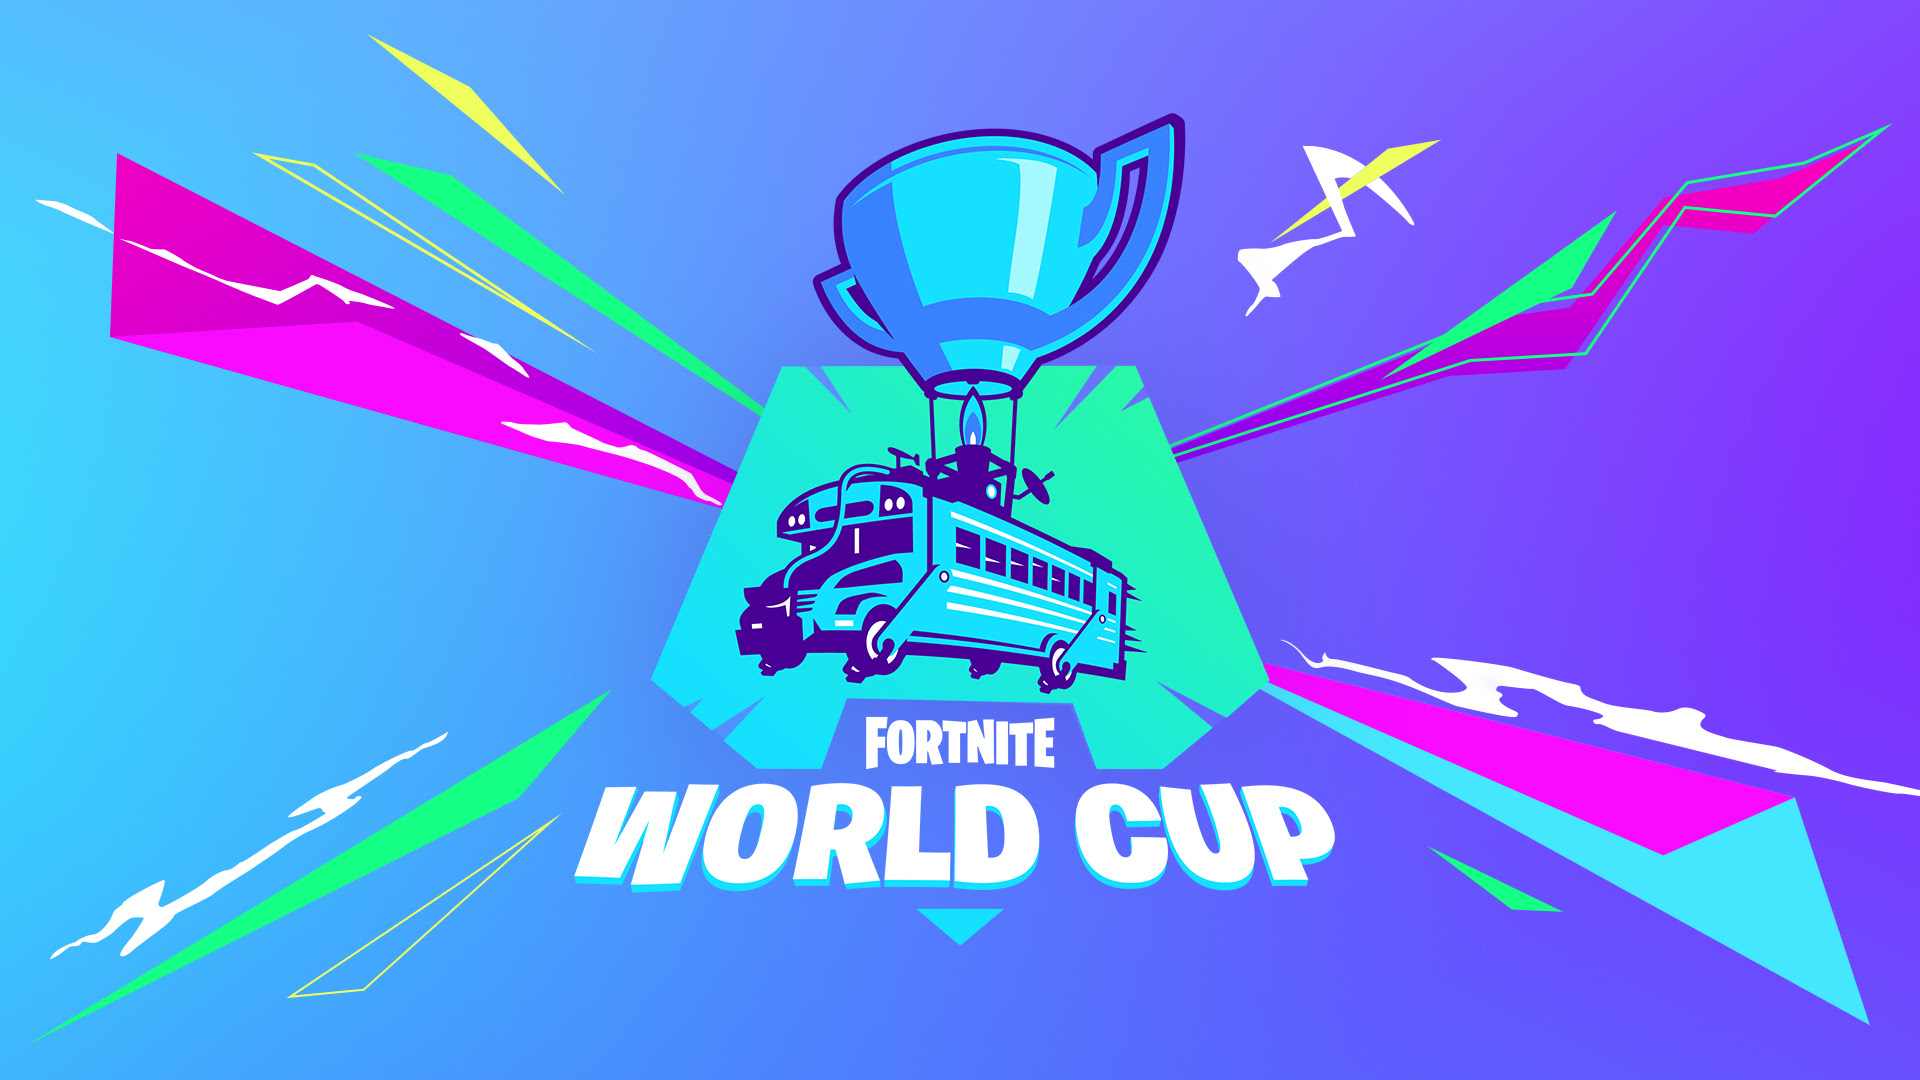 Epic reveals full details for the Fortnite World Cup Open Qualifiers